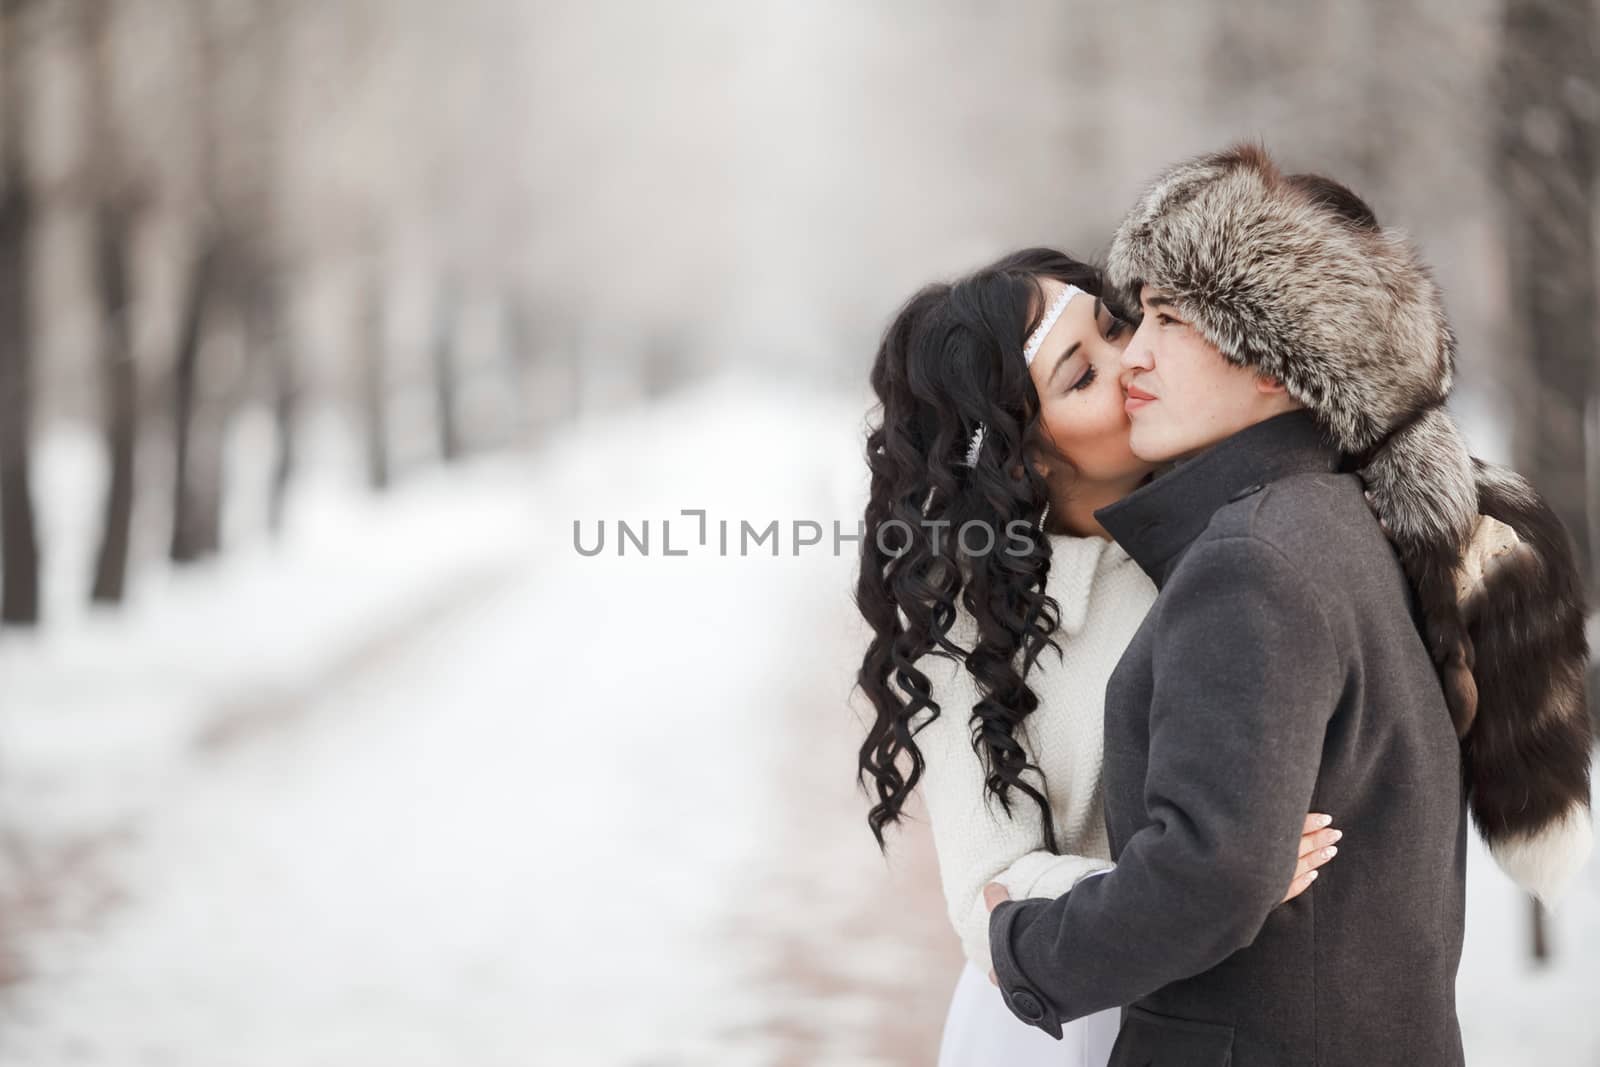 Exotic asian bride and groom kissing in middle of snowy winter alley. Young man in winter coat and fur hat, bride in white wedding dress with sheepskin. Cold season warm clothing. Copy space for text.